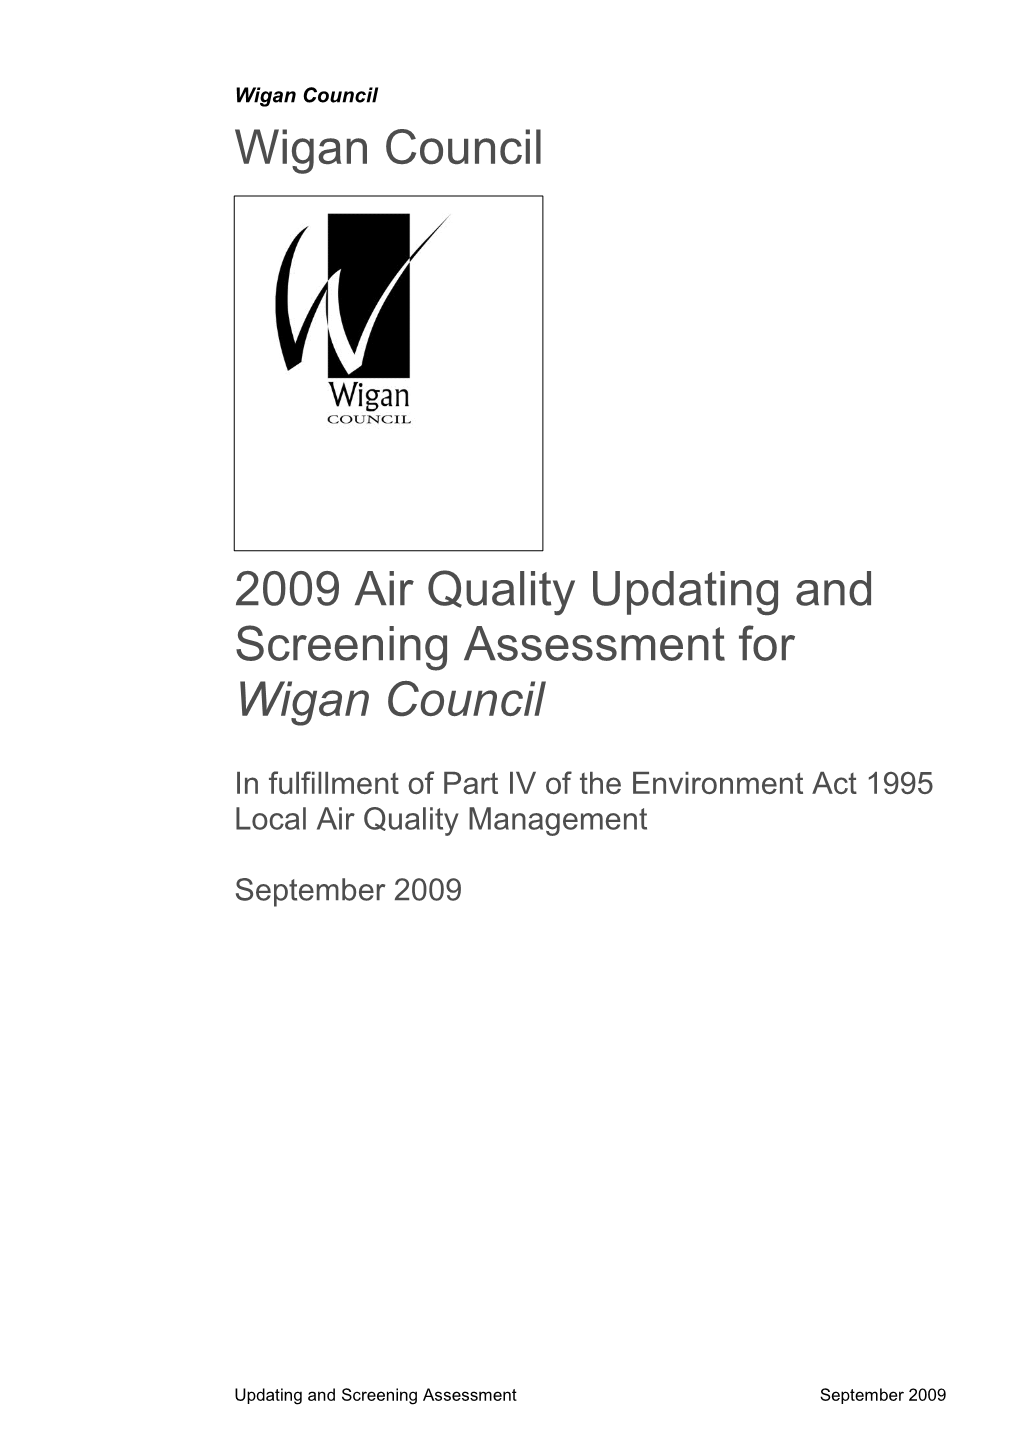 Air Quality Screening and Assessment Report 2009